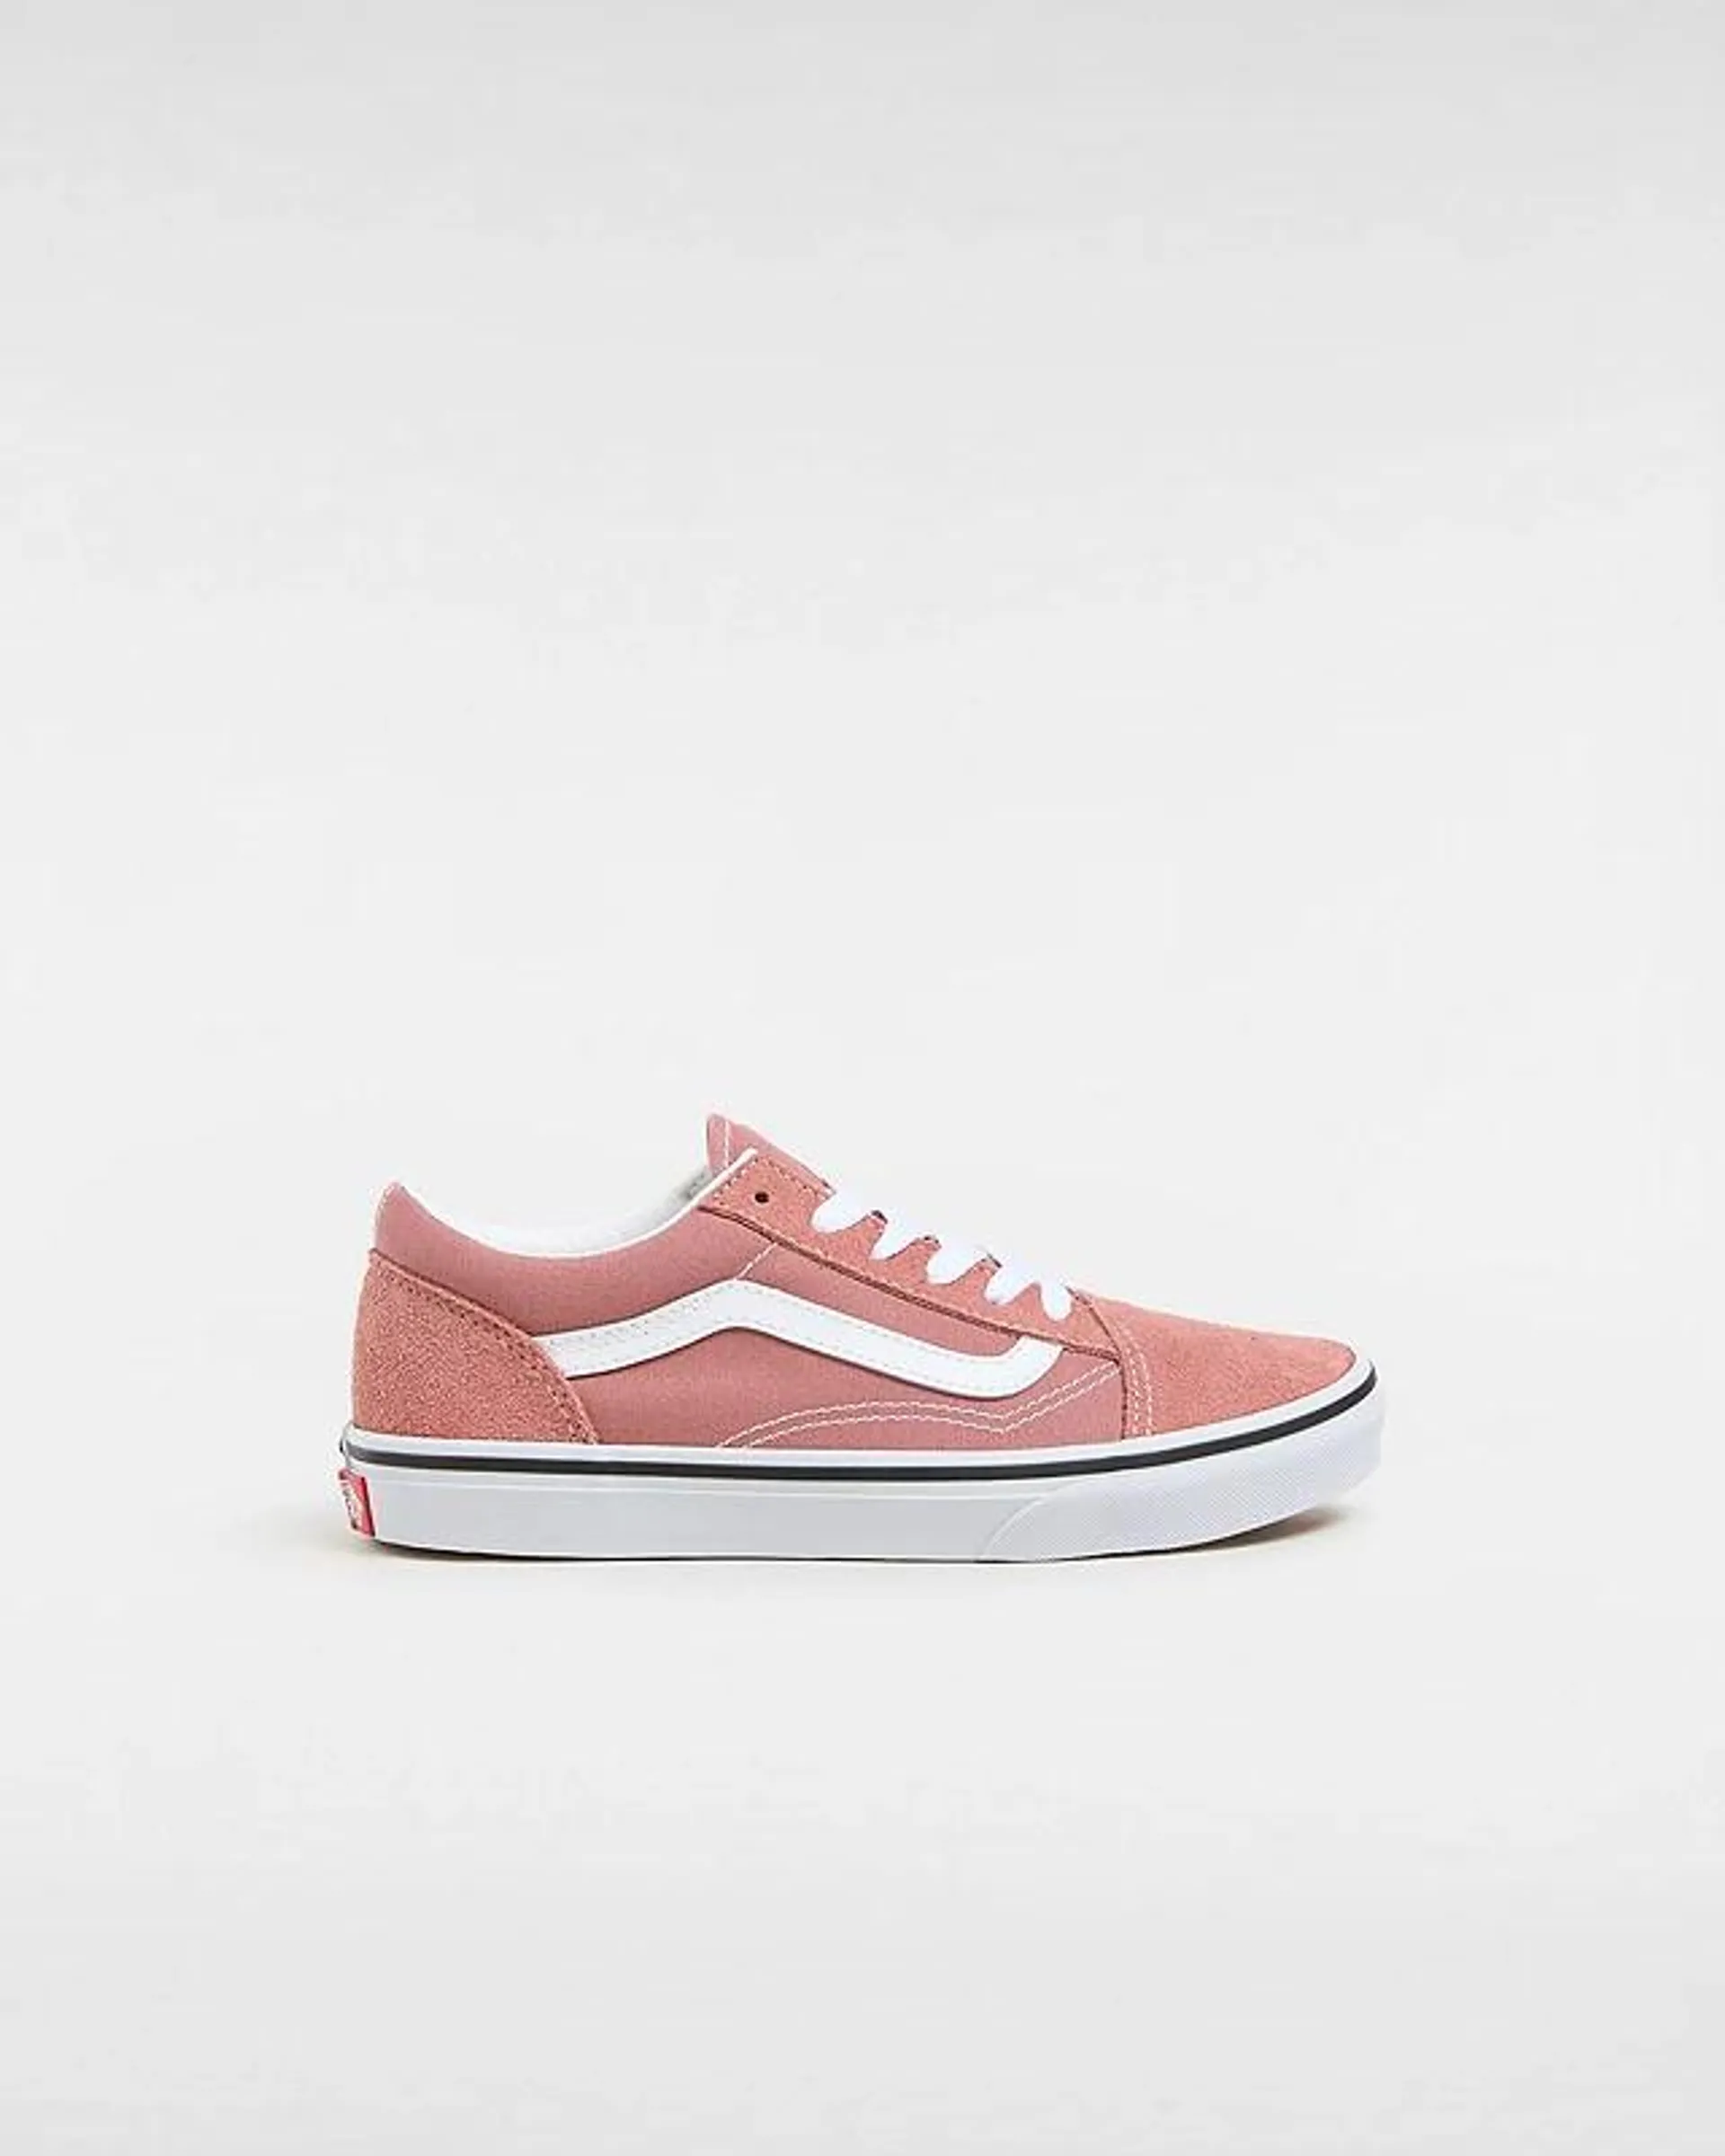 Chaussures Color Theory Old Skool Enfant (8-14 ans)